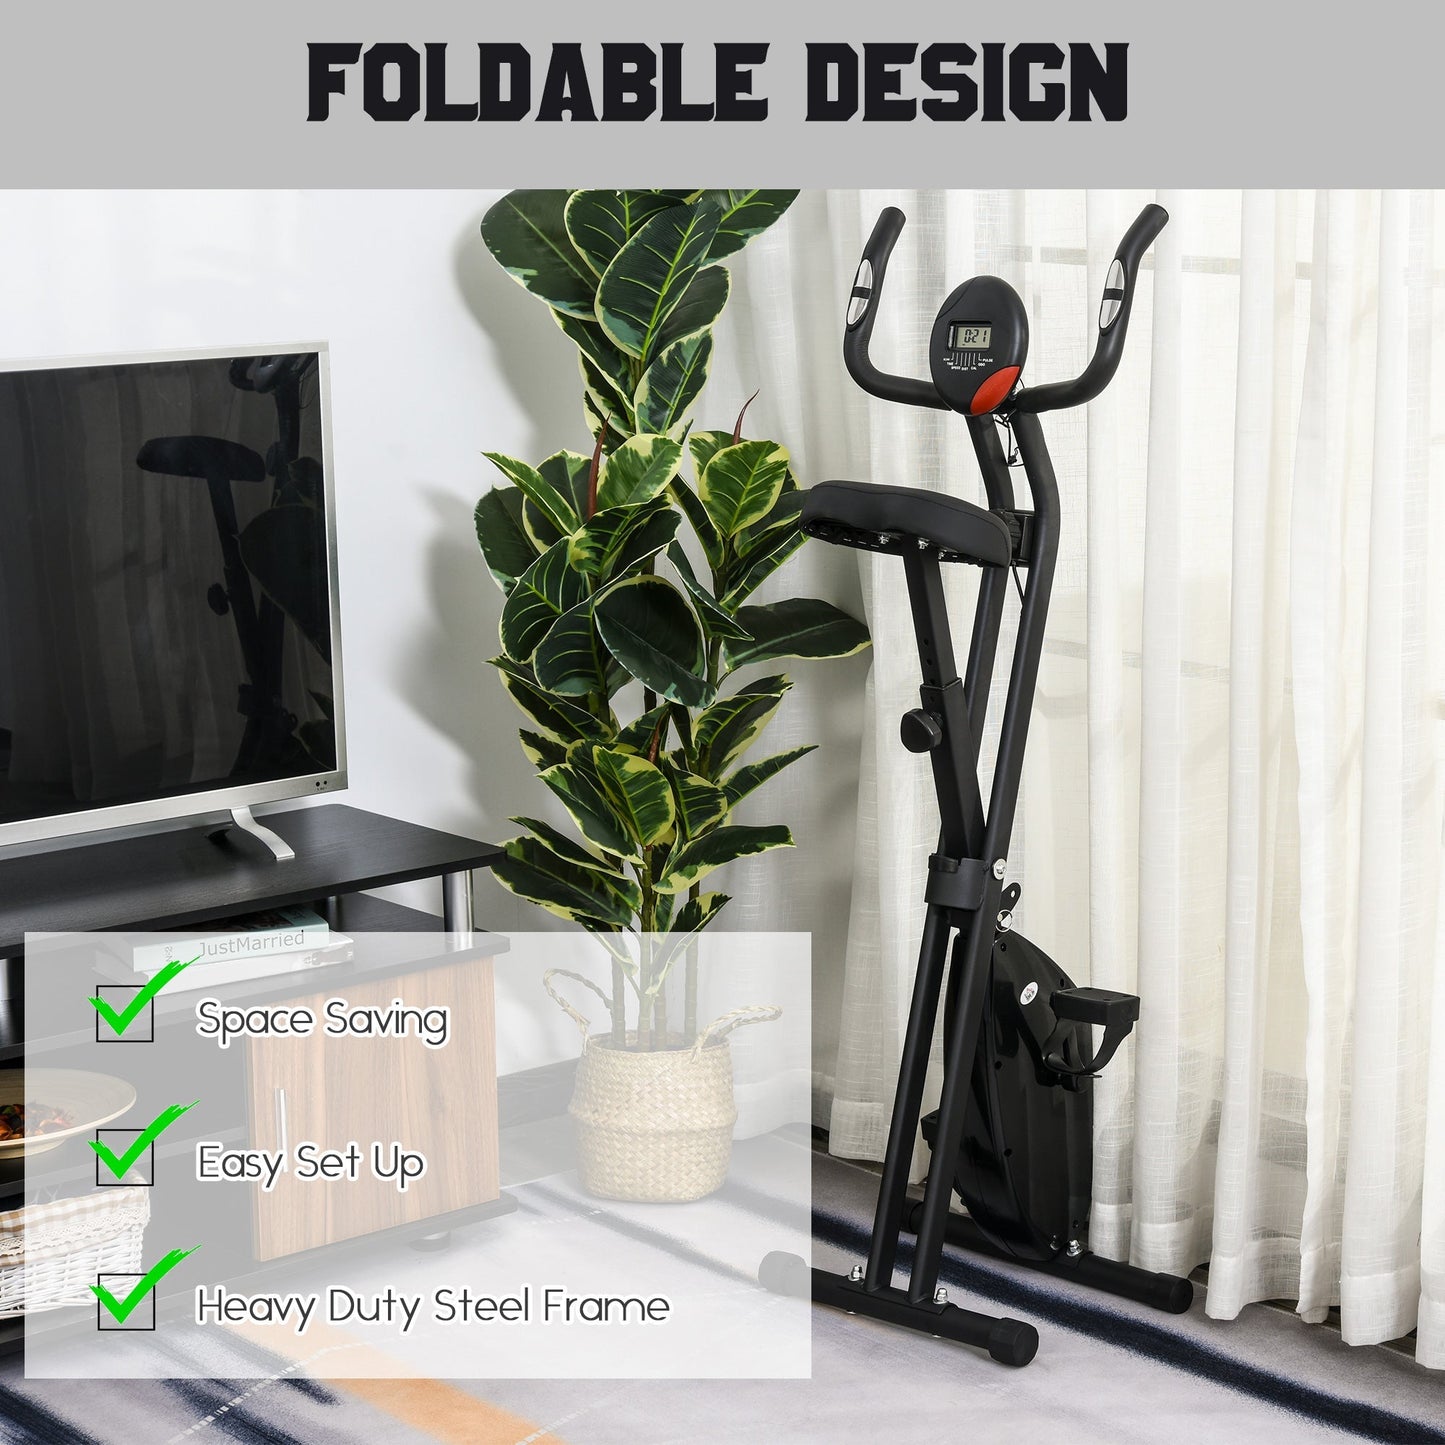 Foldable Exercise Bike Upright Fitness Bike 8-Level Resistance Cardio Workout at Gallery Canada